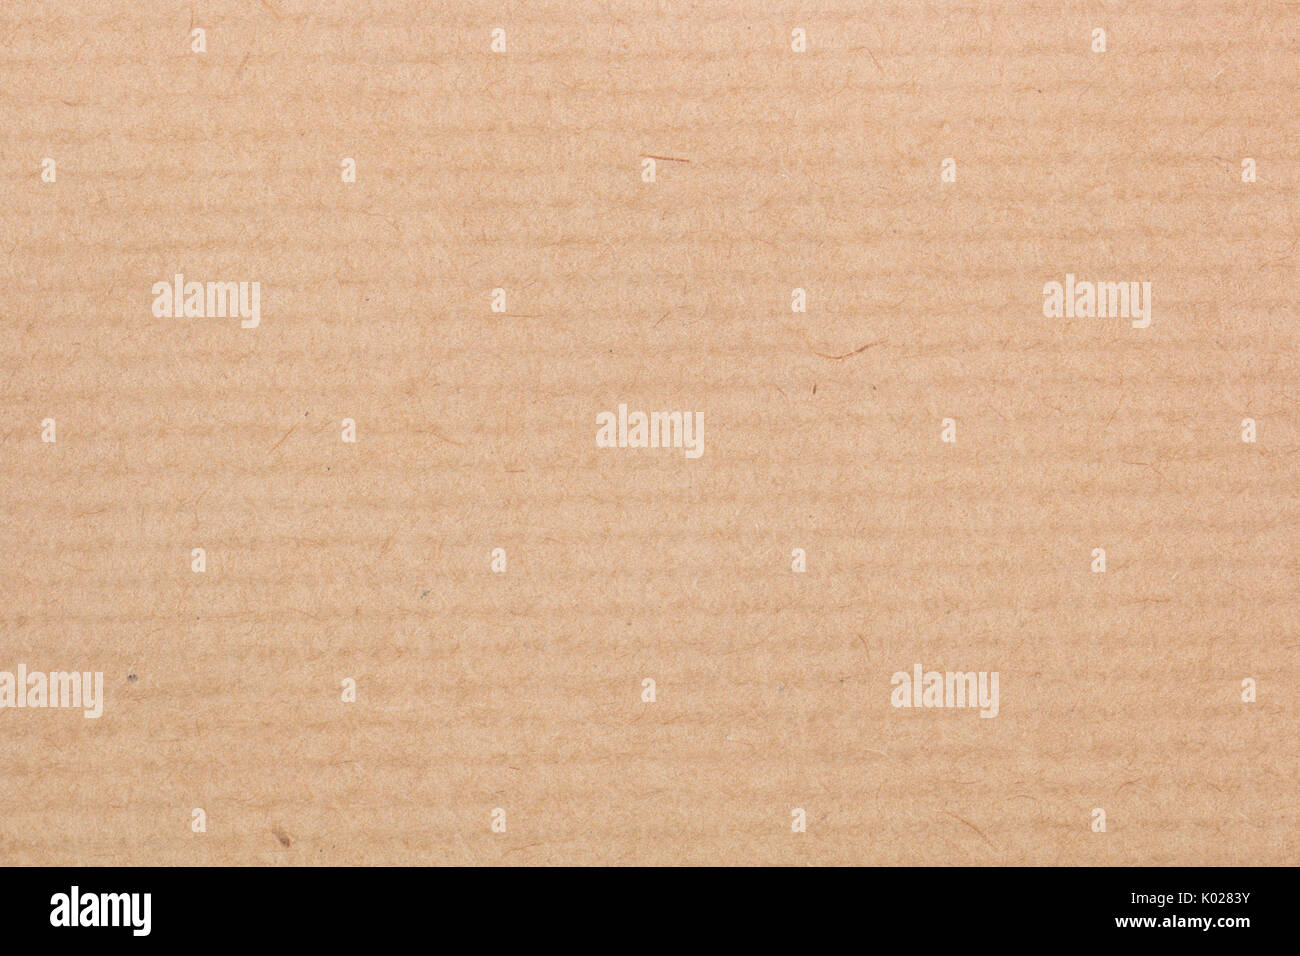 natural brown recycled paper texture background Stock Photo